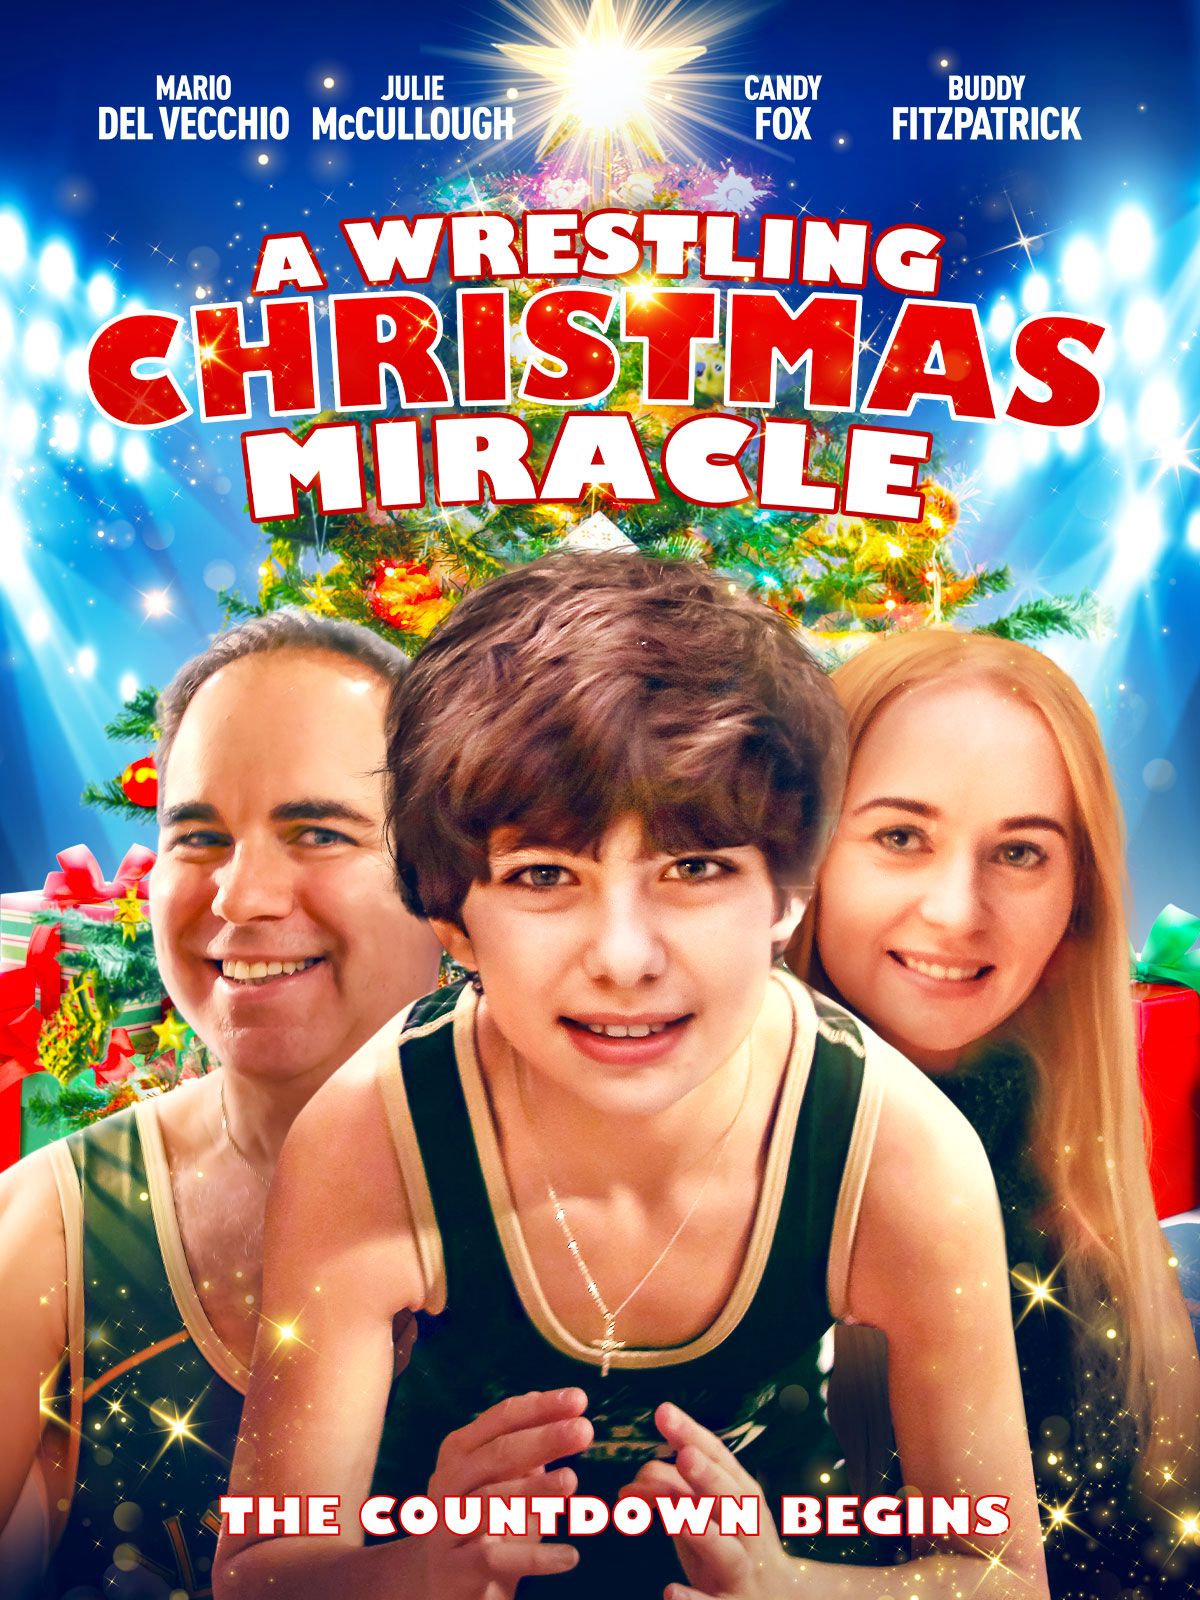 Keyart for the movie A Wrestling Christmas Miracle